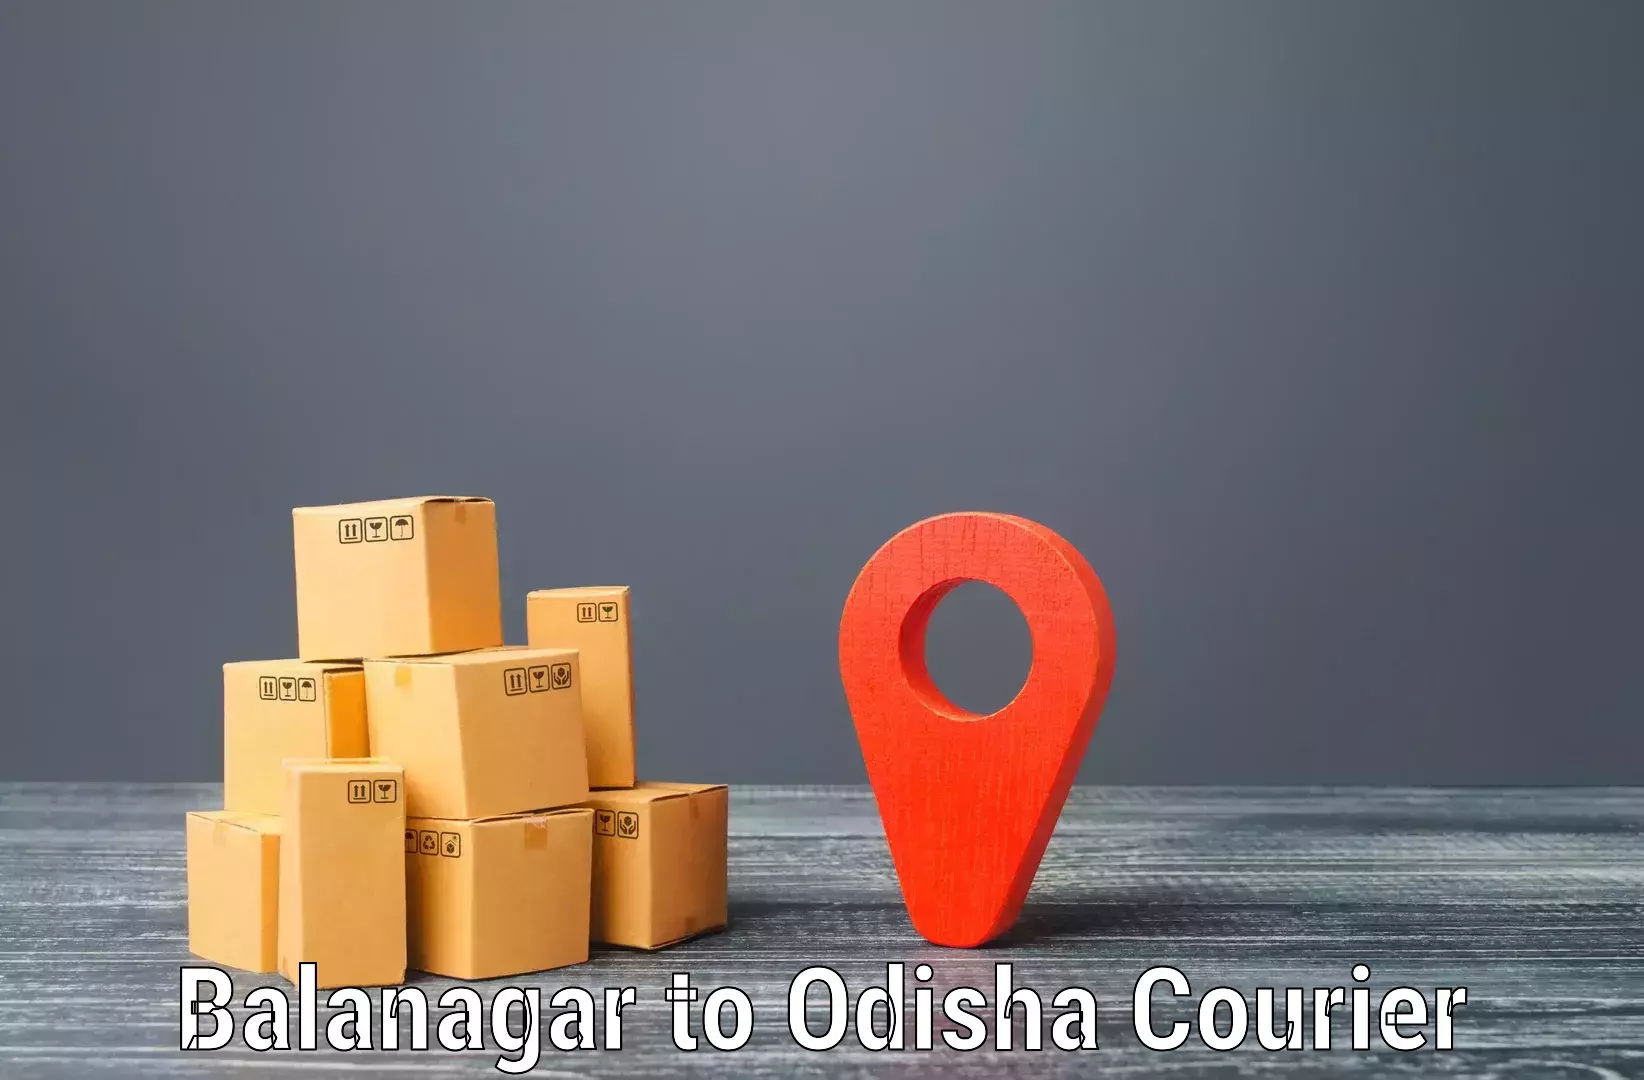 Easy access courier services in Balanagar to Khaprakhol